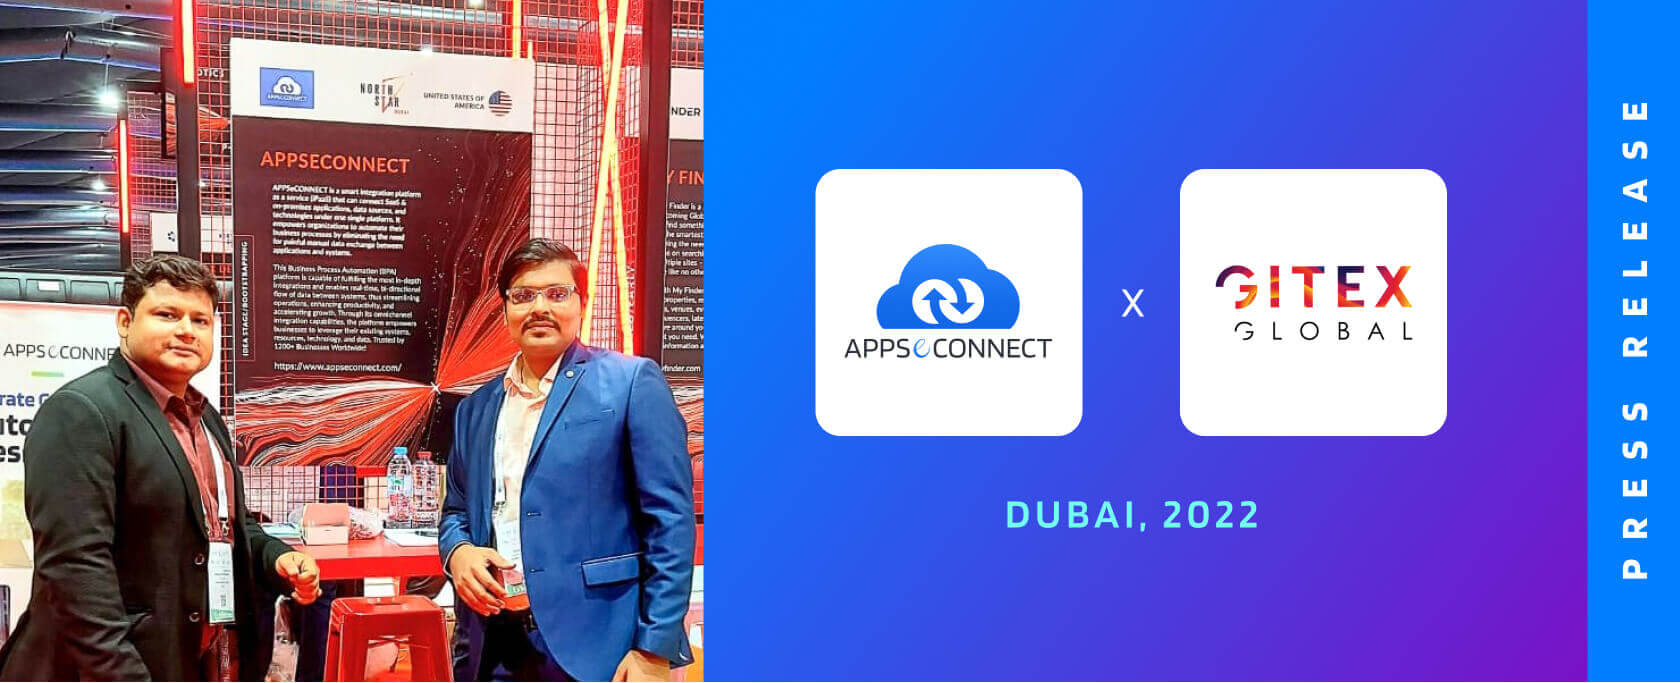 APPSeCONNECT Exhibits at GITEX GLOBAL 2022!